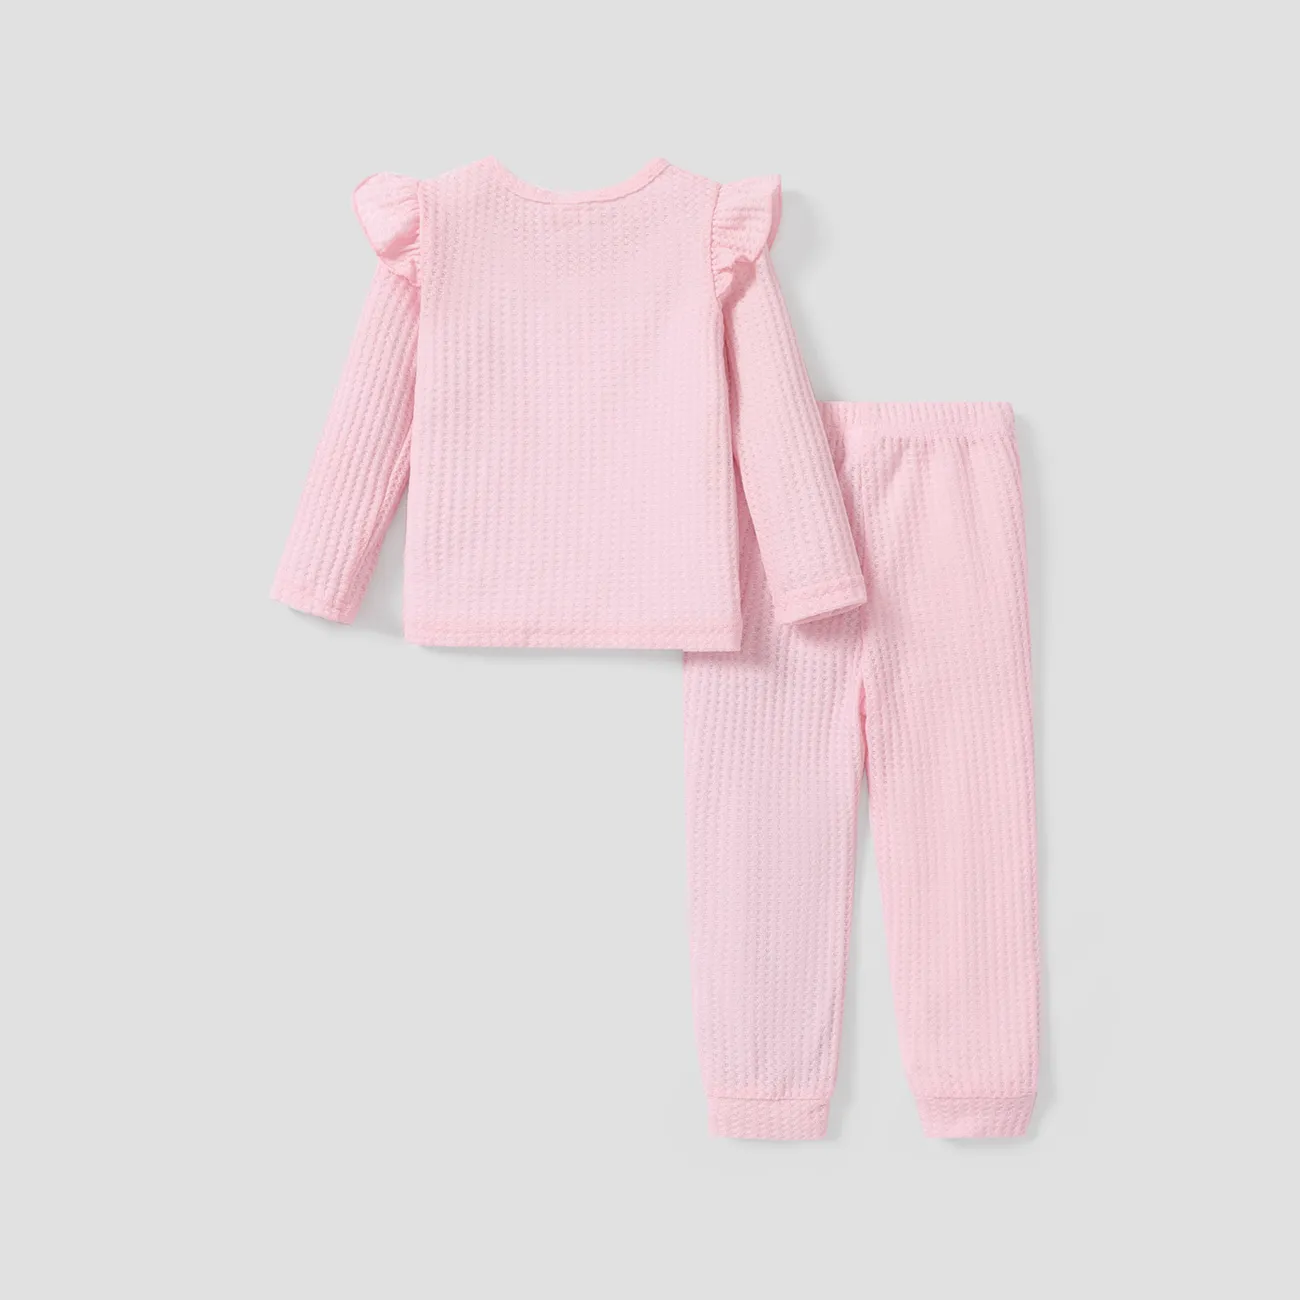 2-piece Toddler Girl Ruffled Textured Long-sleeve Top and Solid Color Pants Set Pink big image 1